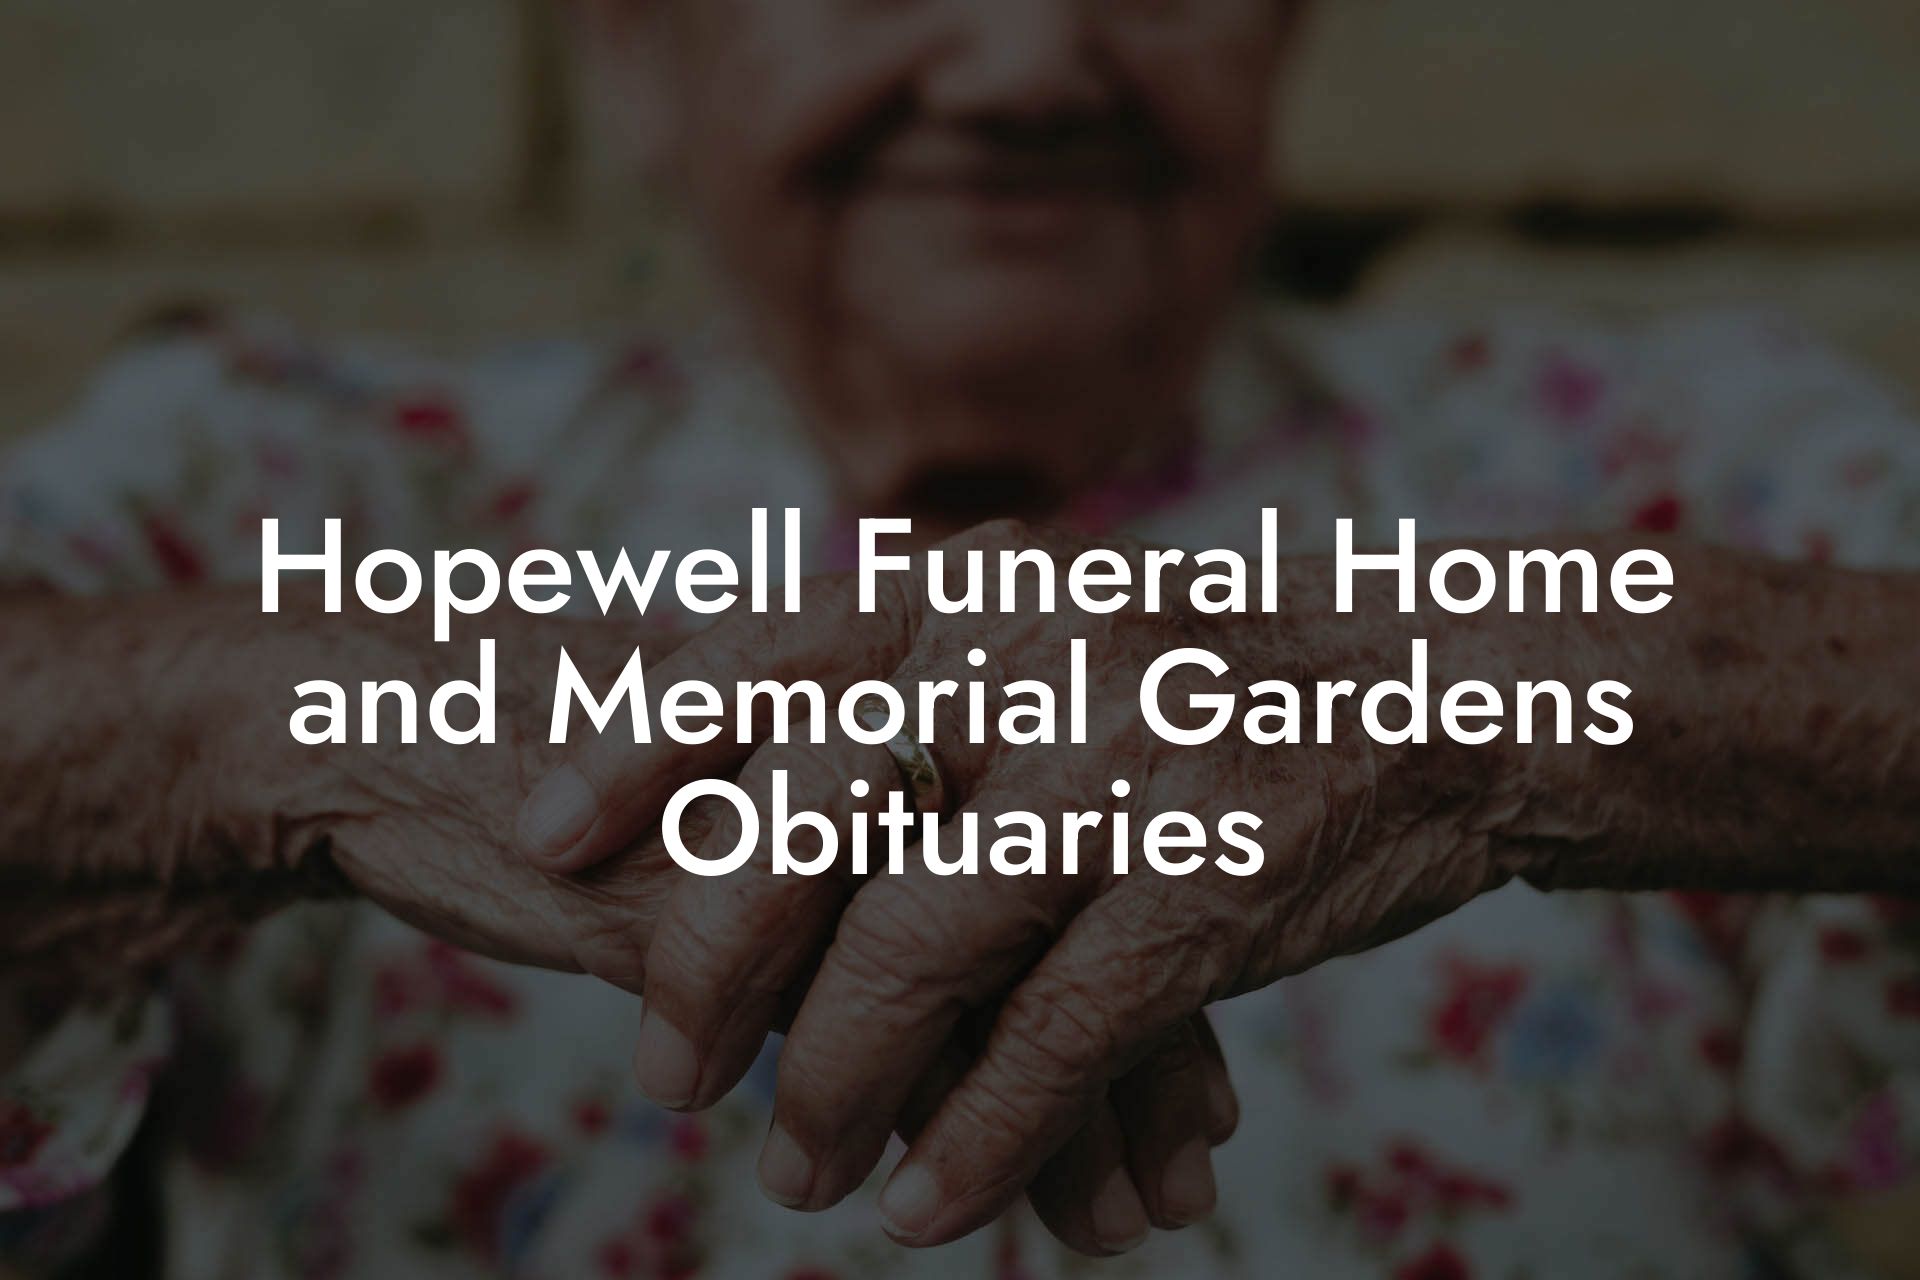 Hopewell Funeral Home and Memorial Gardens Obituaries